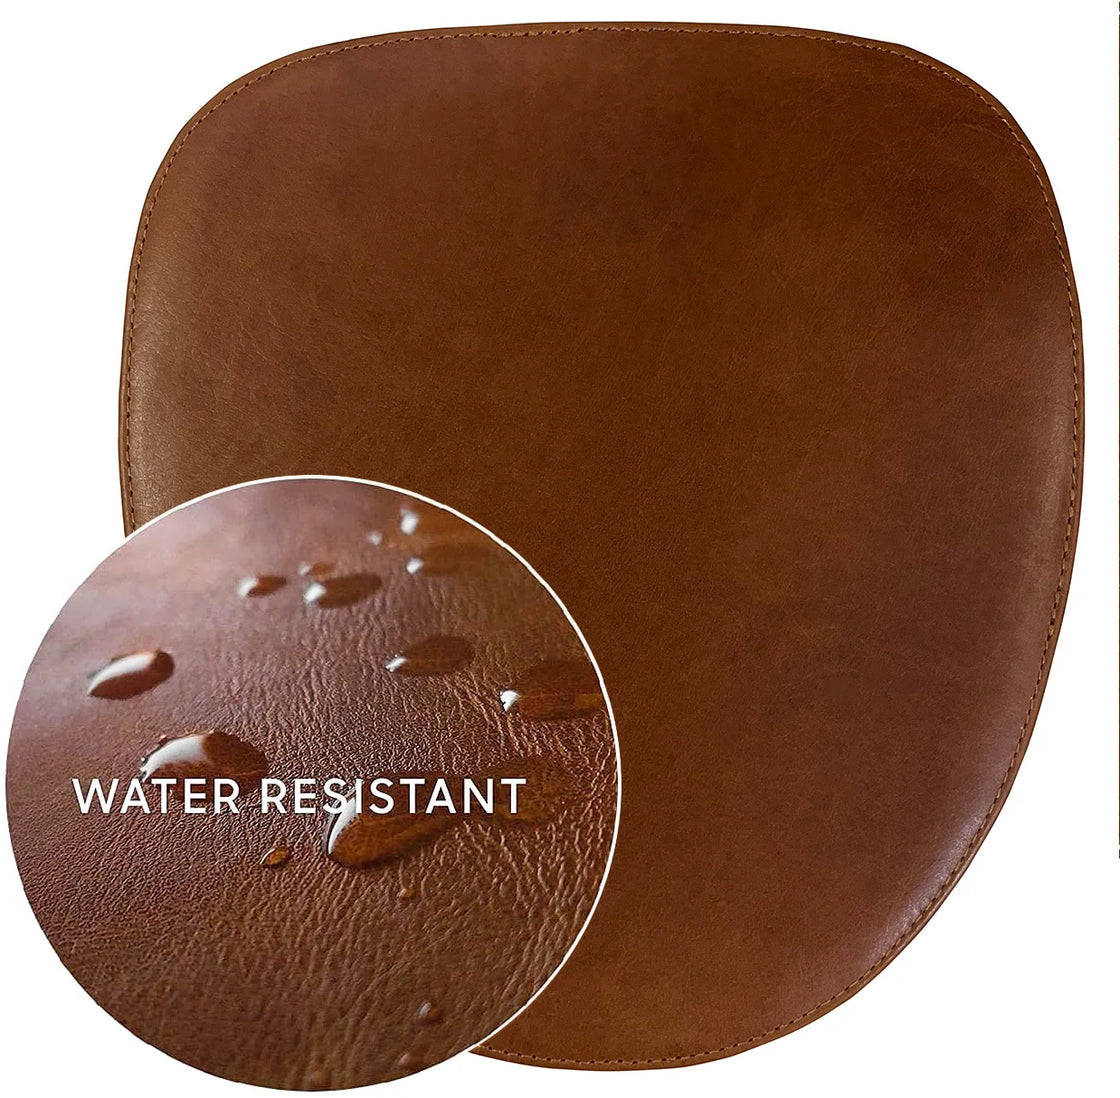 Leather Mouse pad